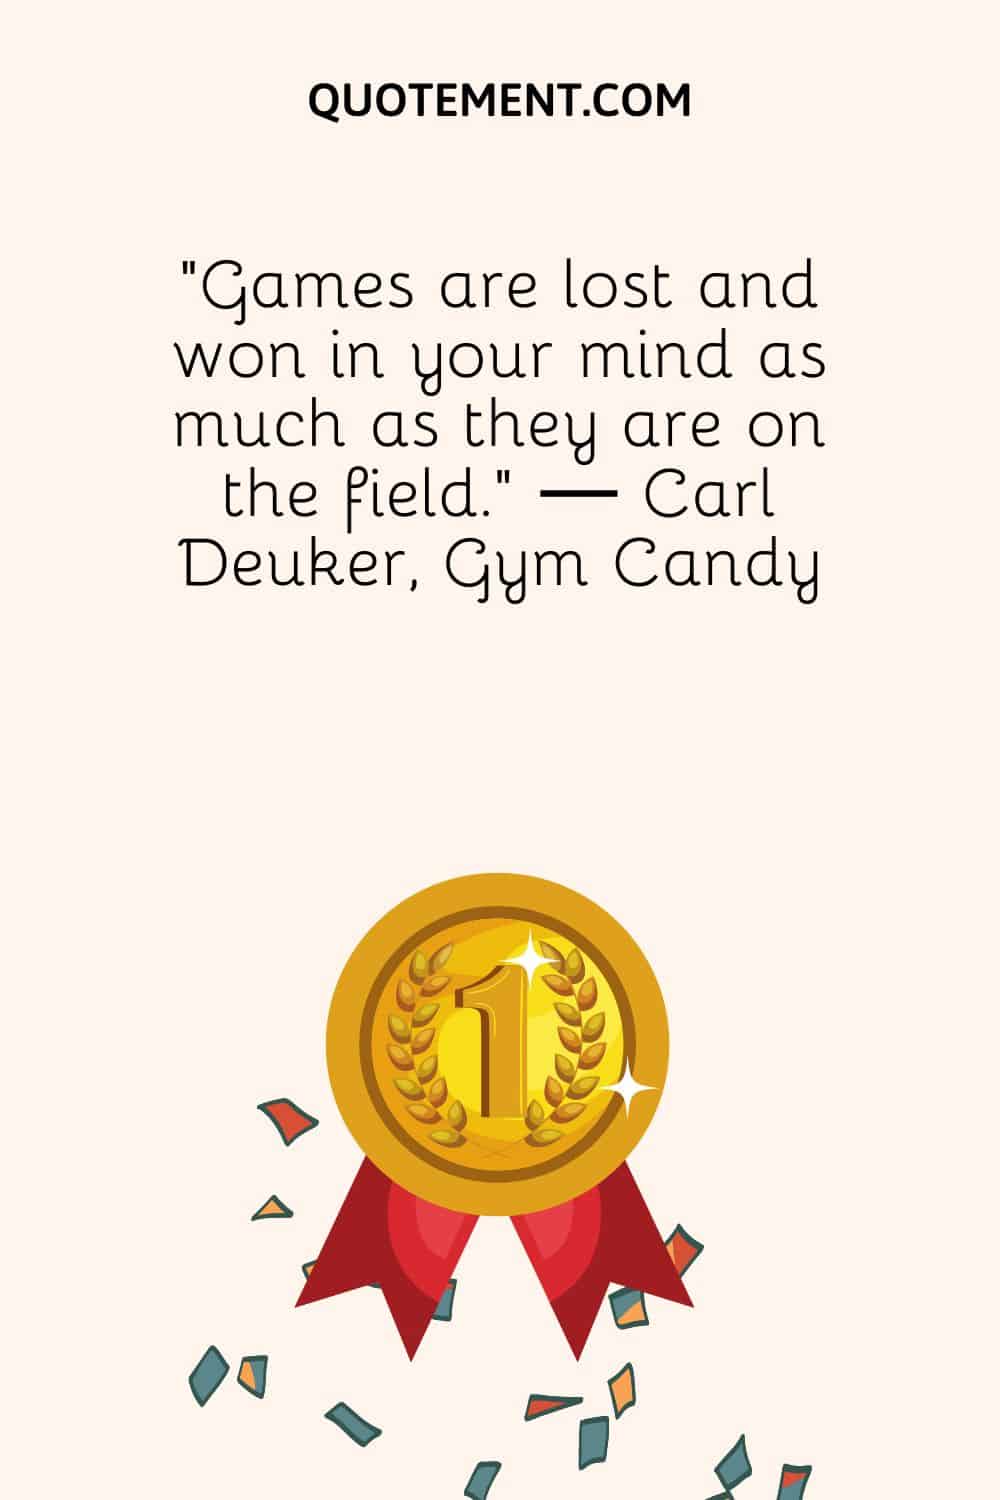 “Games are lost and won in your mind as much as they are on the field.” ― Carl Deuker, Gym Candy